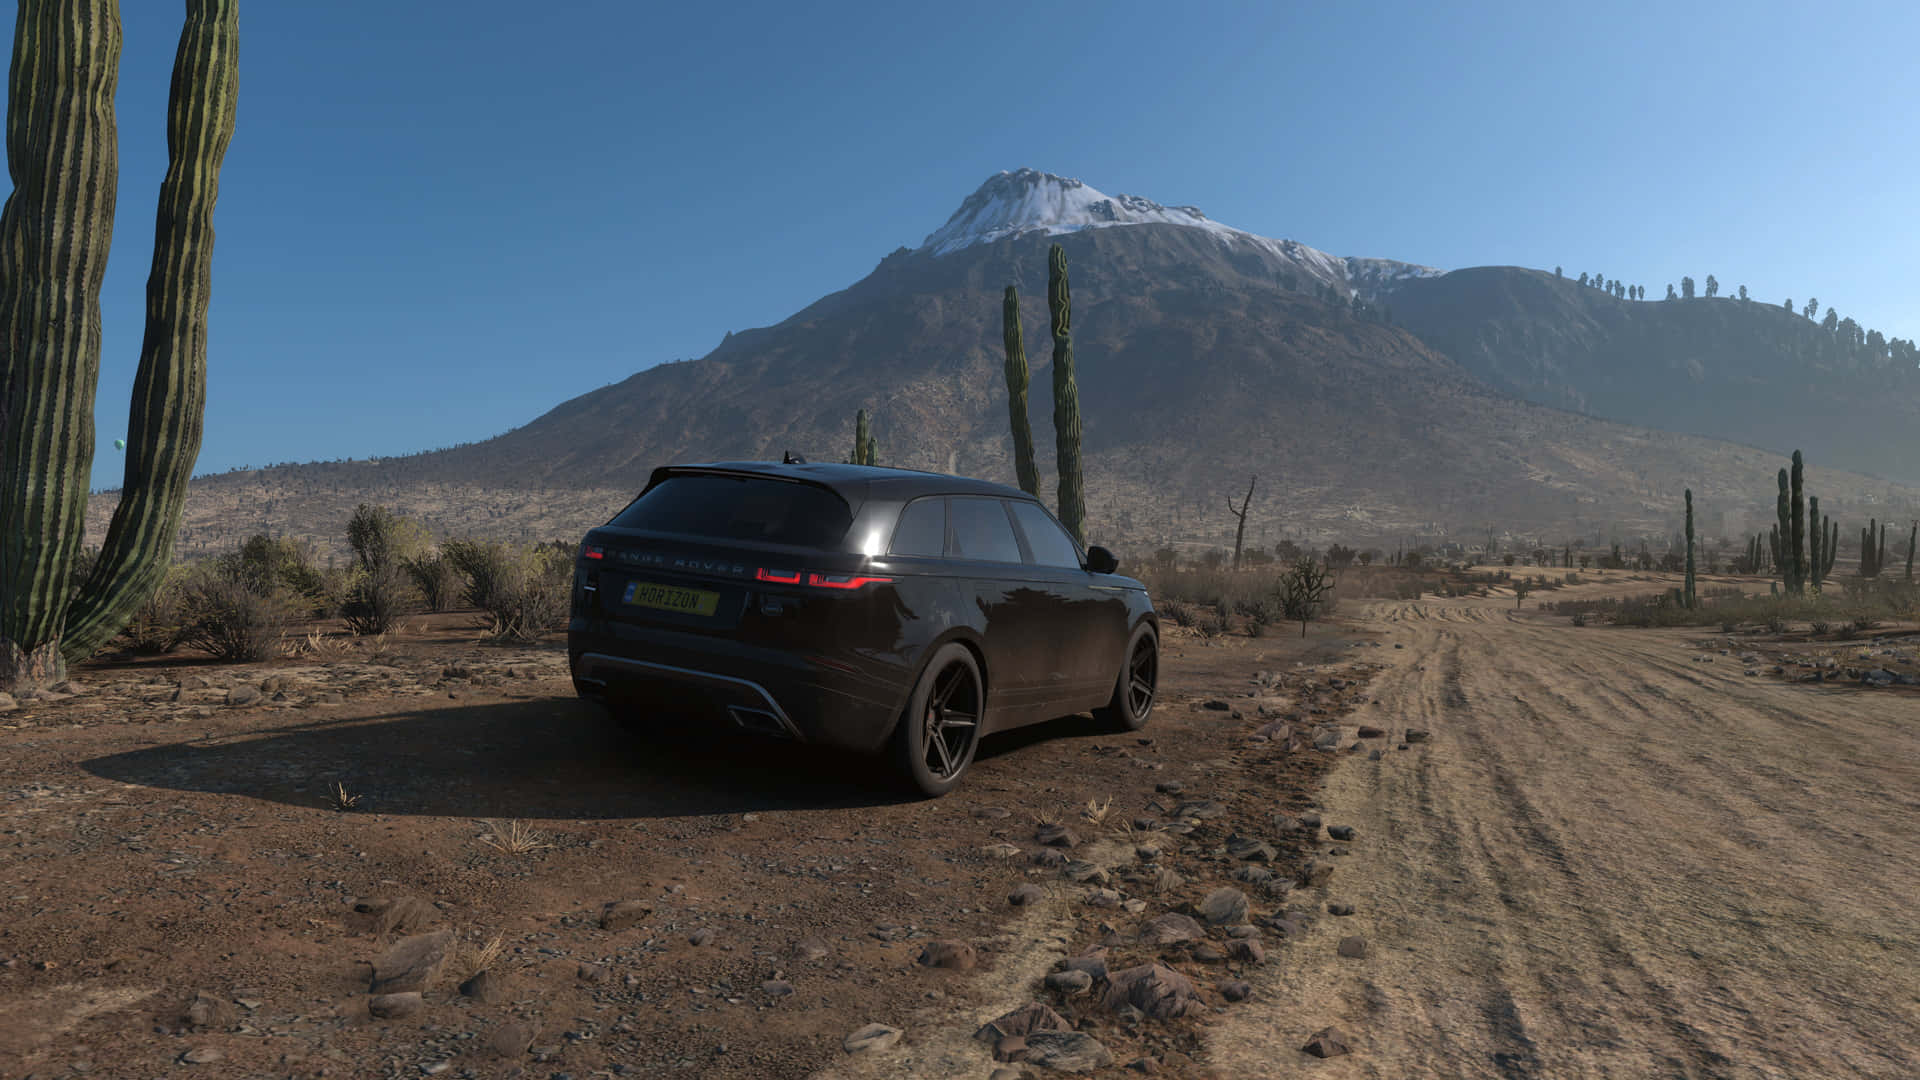 A Black Suv Is Parked On A Dirt Road Near A Mountain Wallpaper